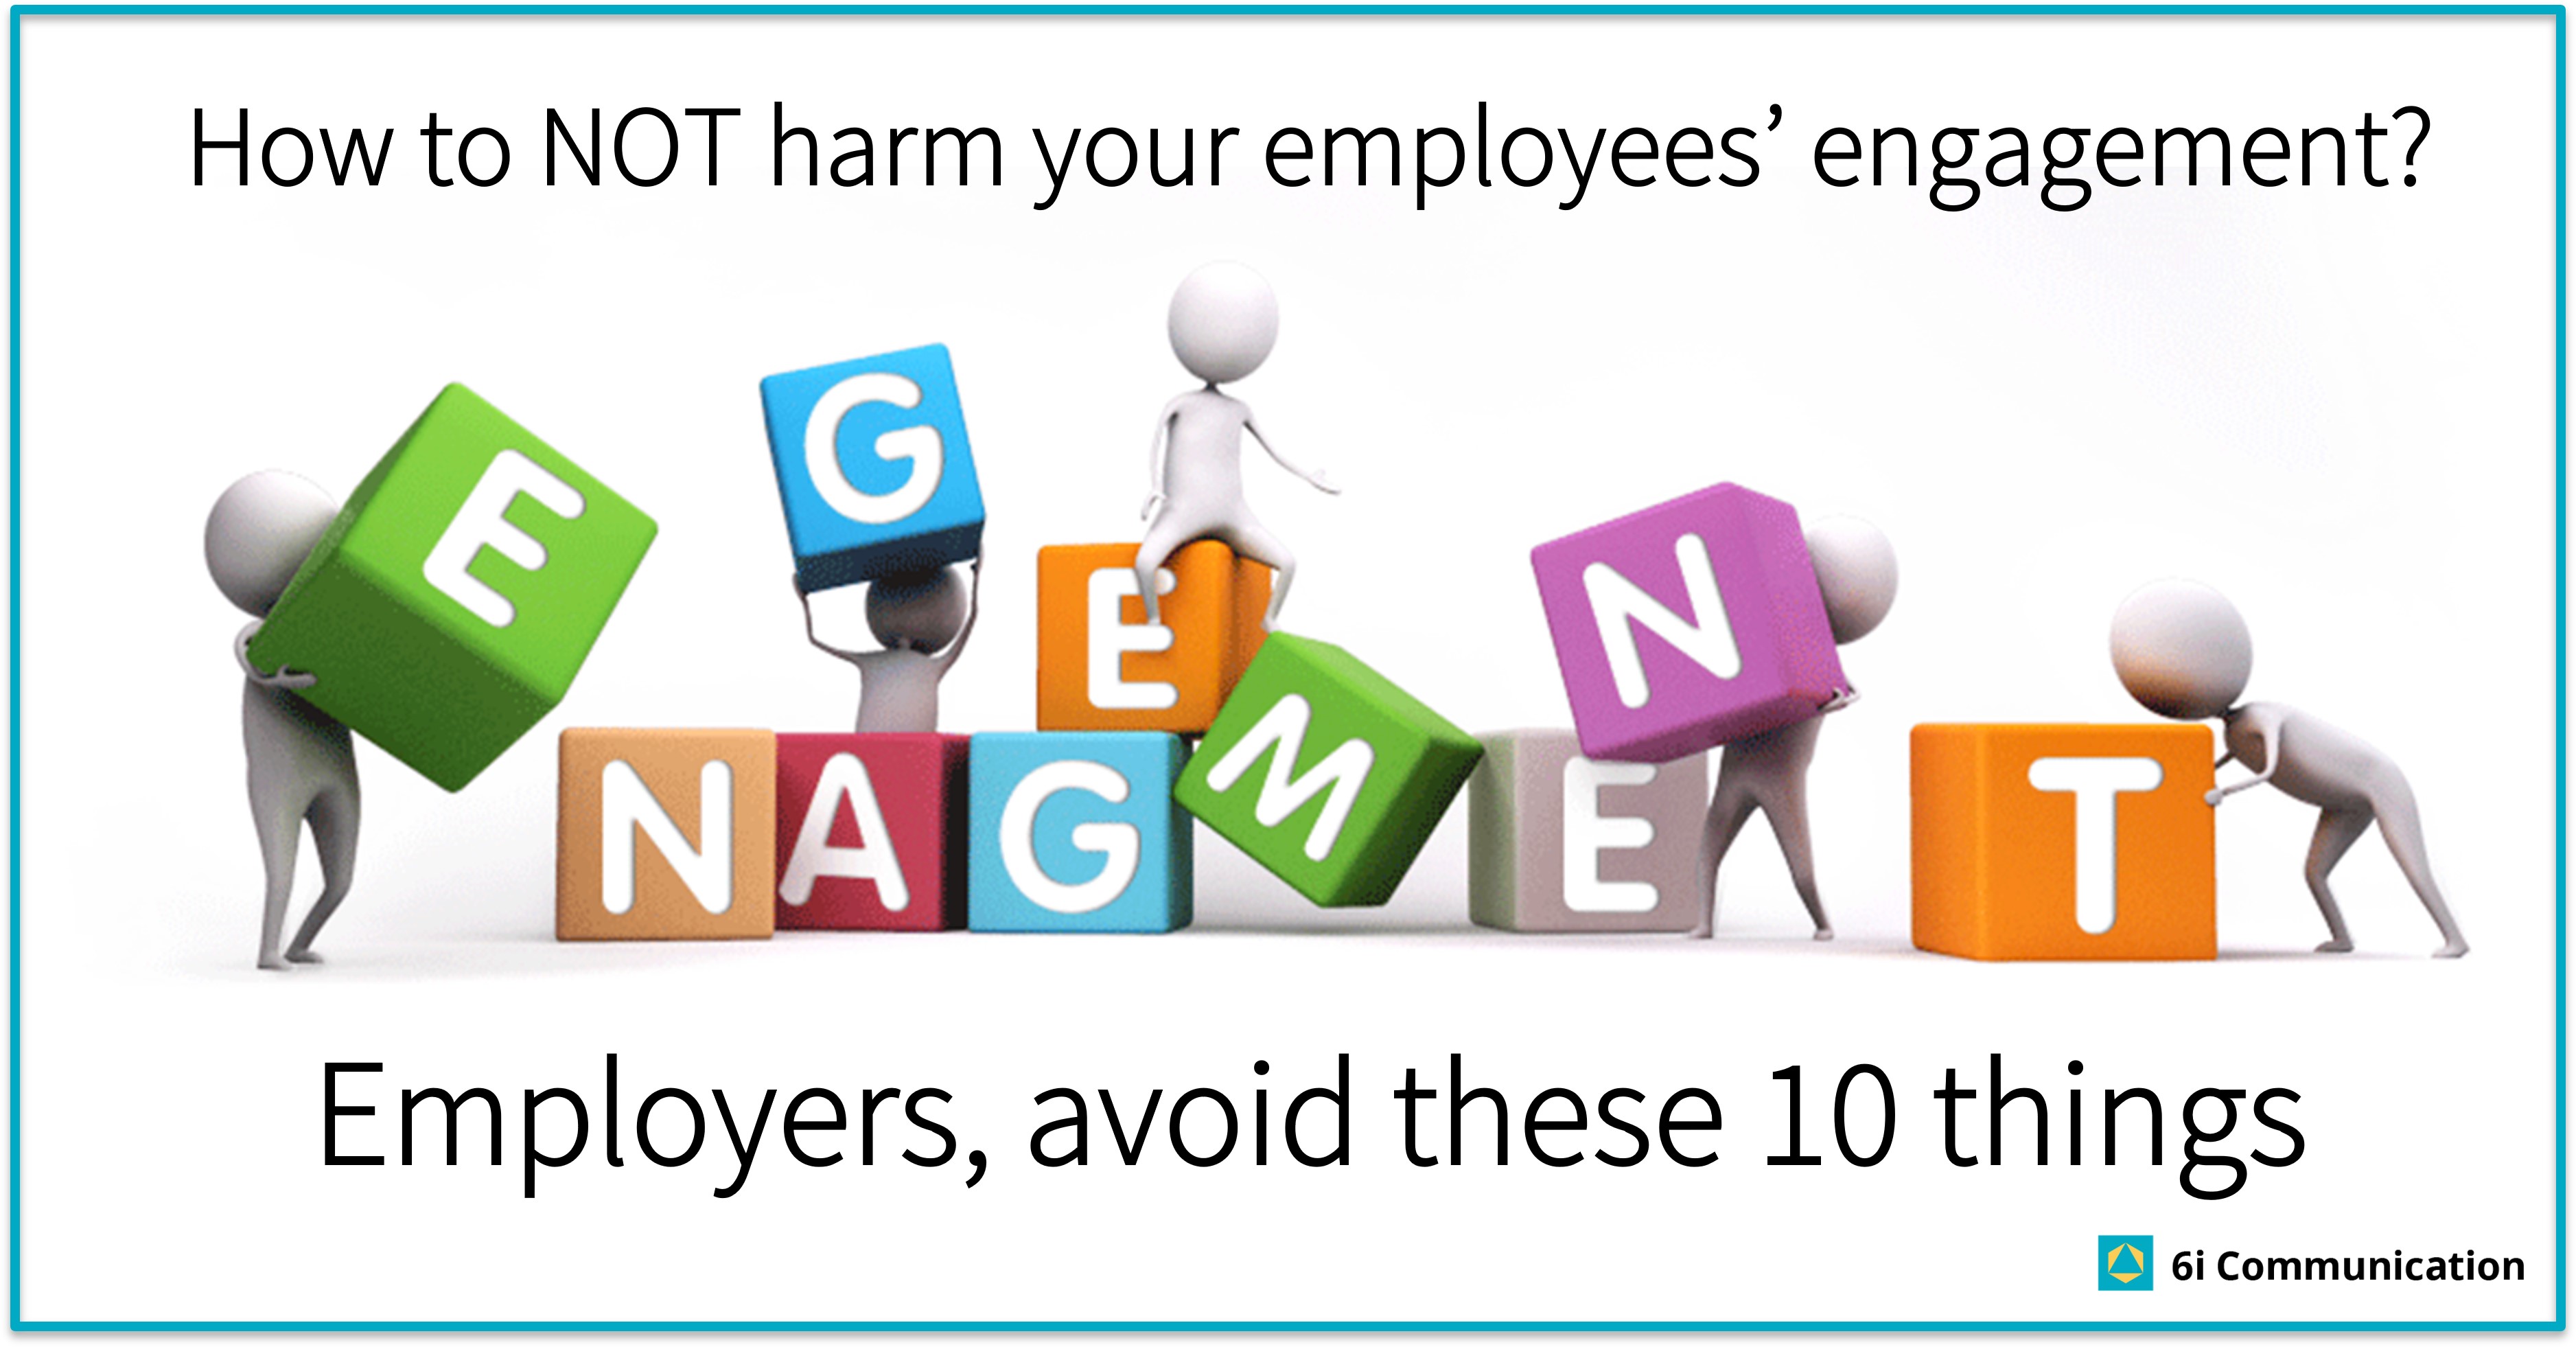 Here are 10 things you might want to stop doing to progress employee engagement among your team members